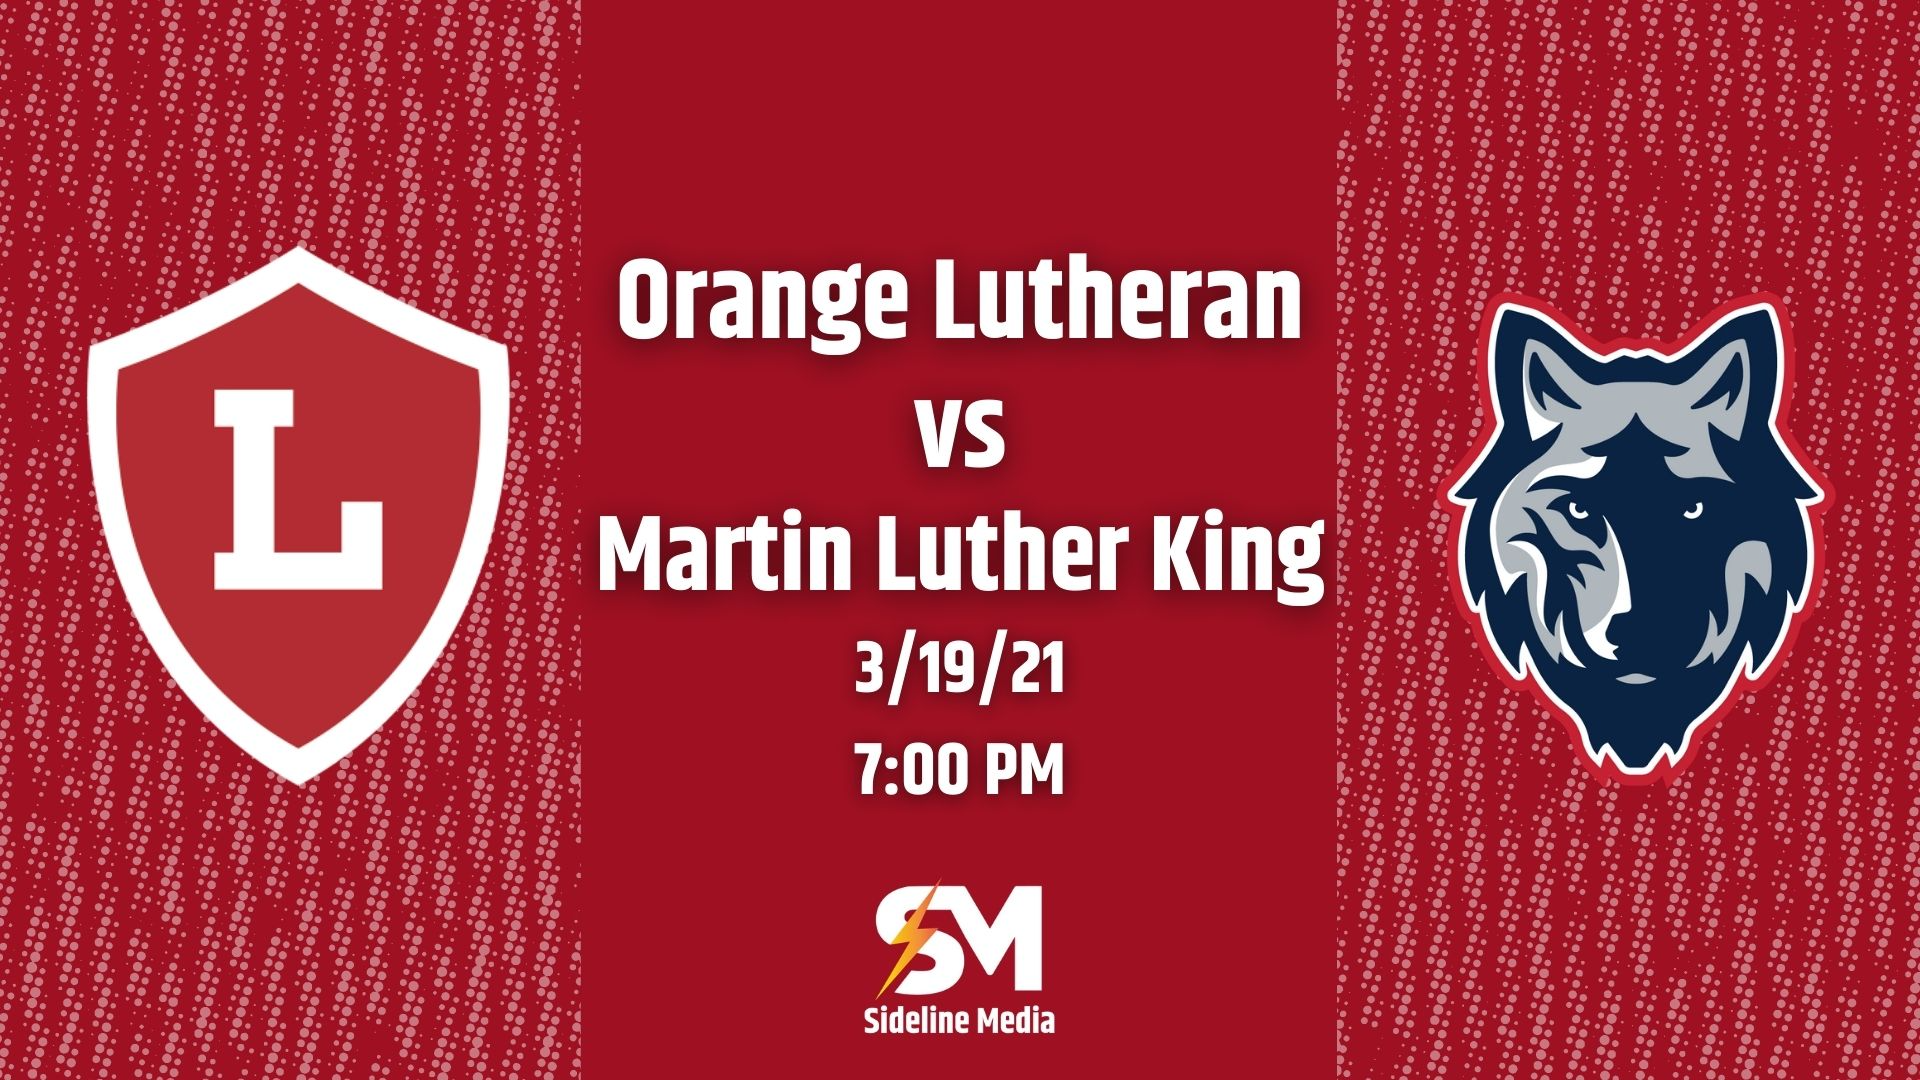 Photo for Orange Lutheran HS vs Martin Luther King HS 3/19/21 on ViewStub